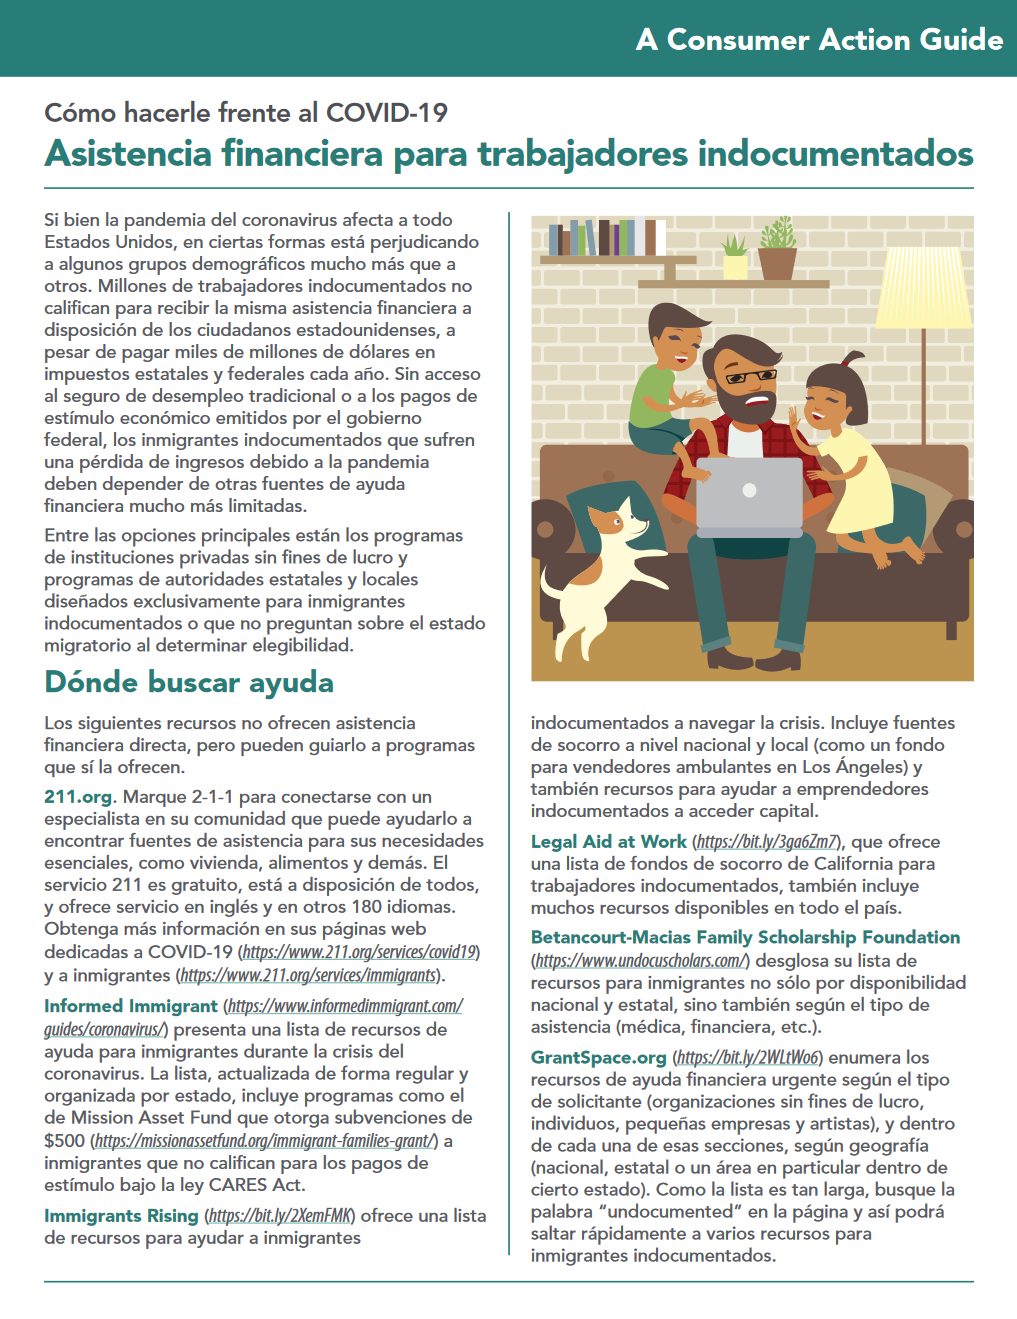 Financial assistance for undocumented workers (Spanish)